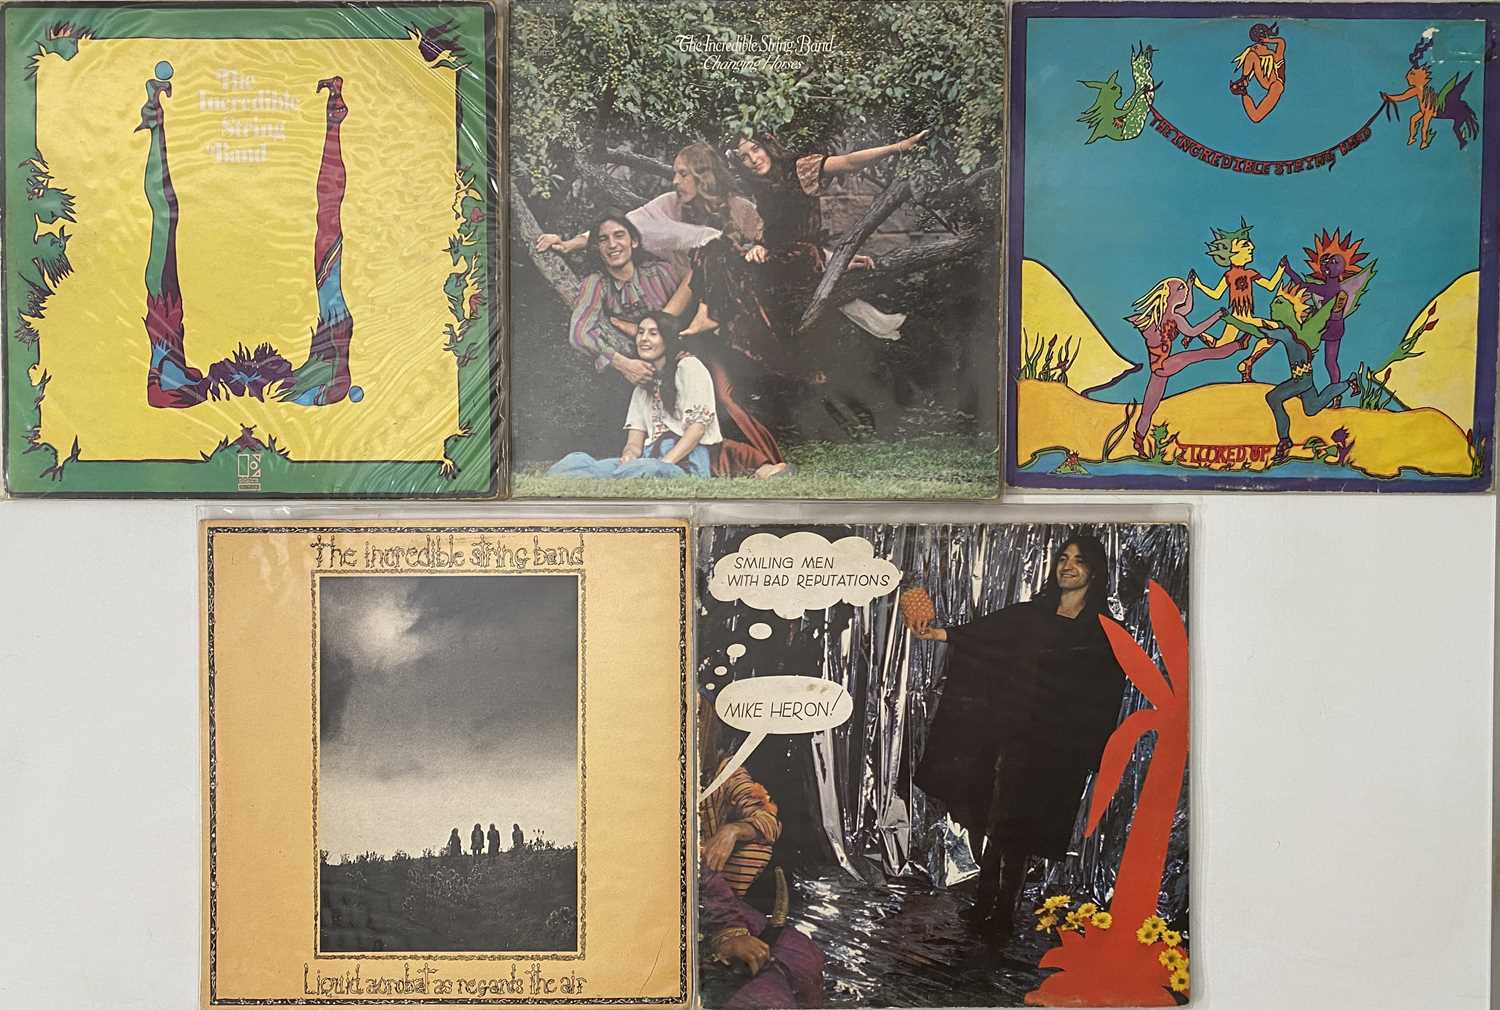 THE INCREDIBLE STRING BAND - LPs - Image 5 of 5